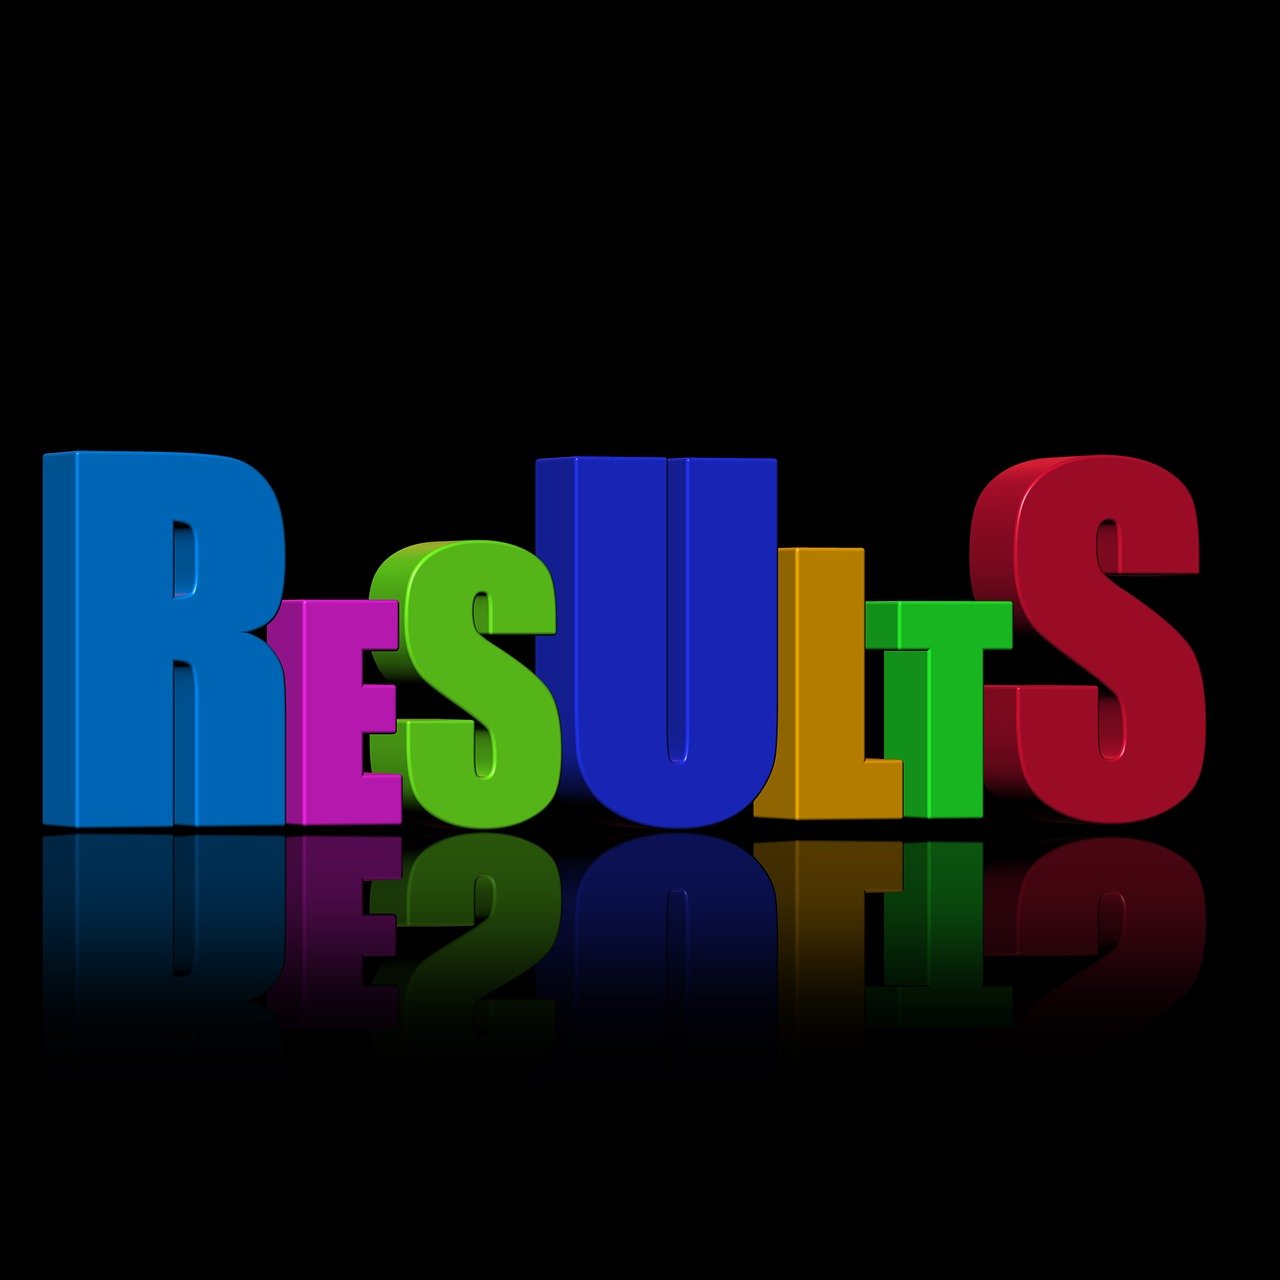 an image of the word results on a black background, shutterstock, multicolored vector art, winning illustration, 2 0 1 0, 3 pm